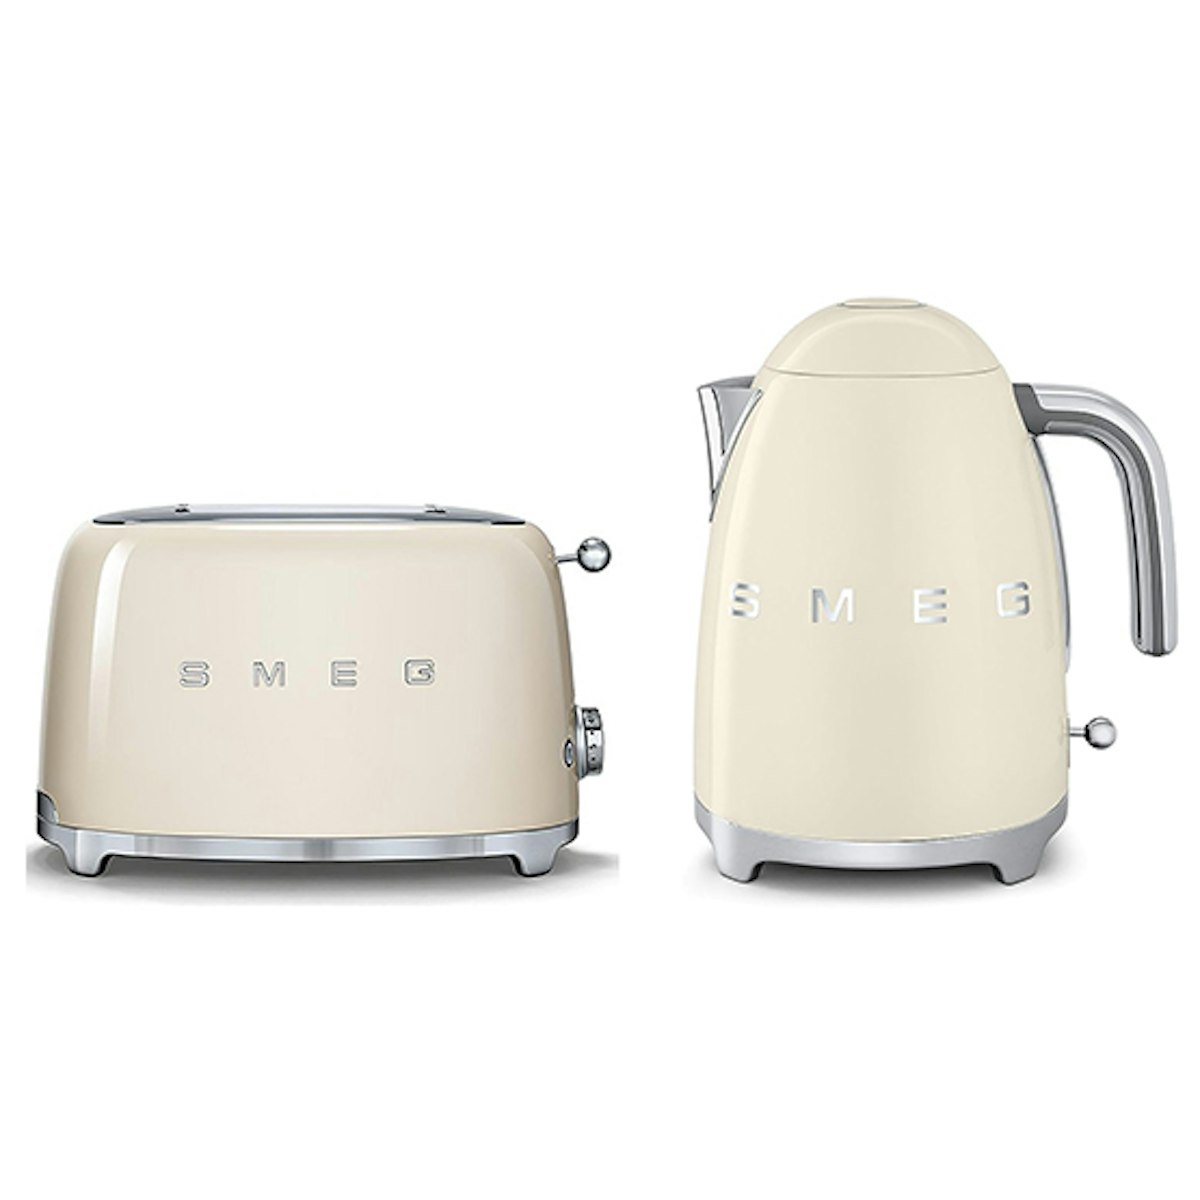 Smeg Toaster And Kettle Set ?auto=format&w=1200&q=80